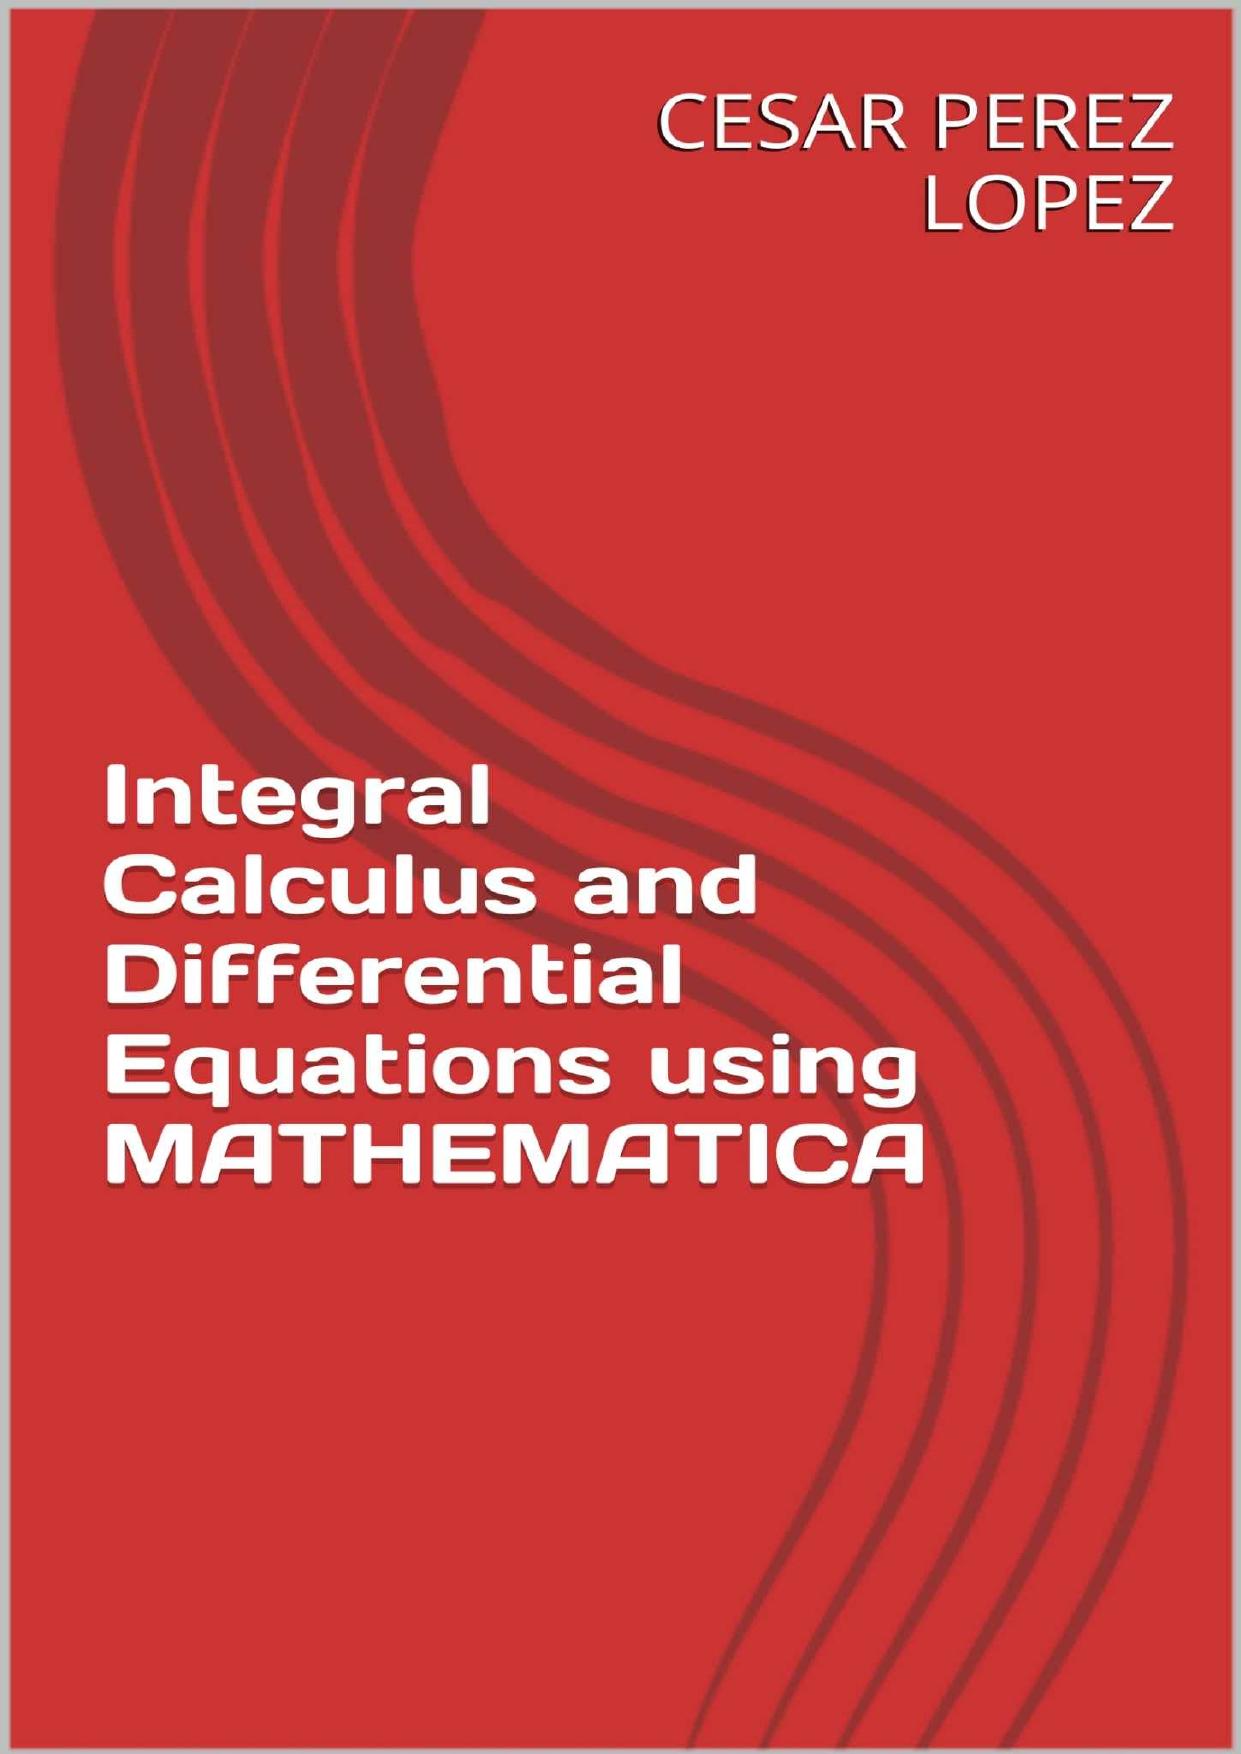 Integral Calculus and Differential Equations using Mathematica®